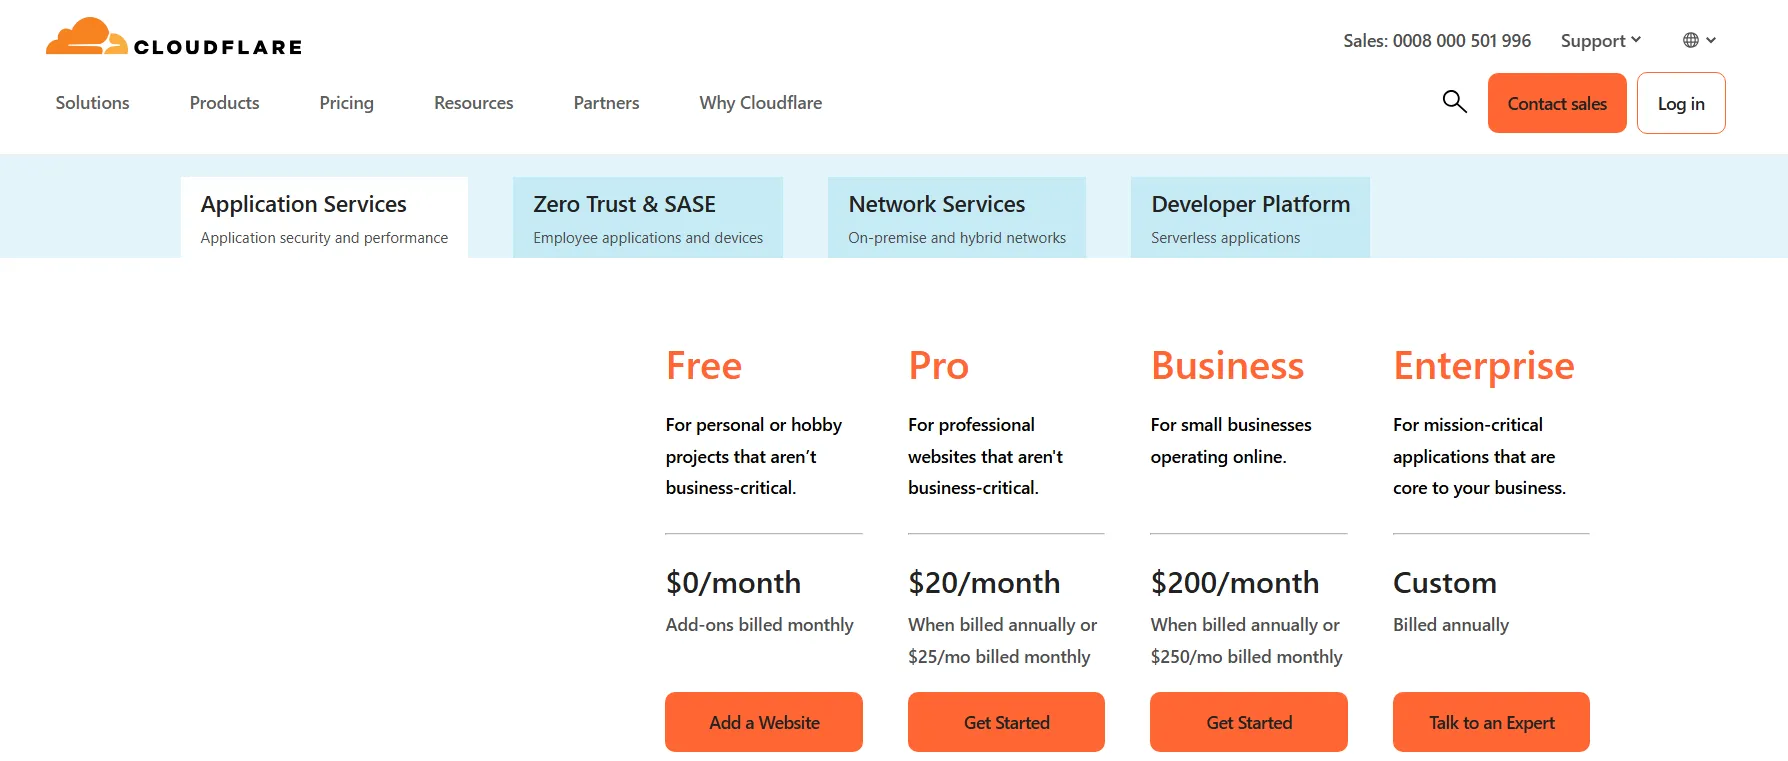 CloudFlare Pricing